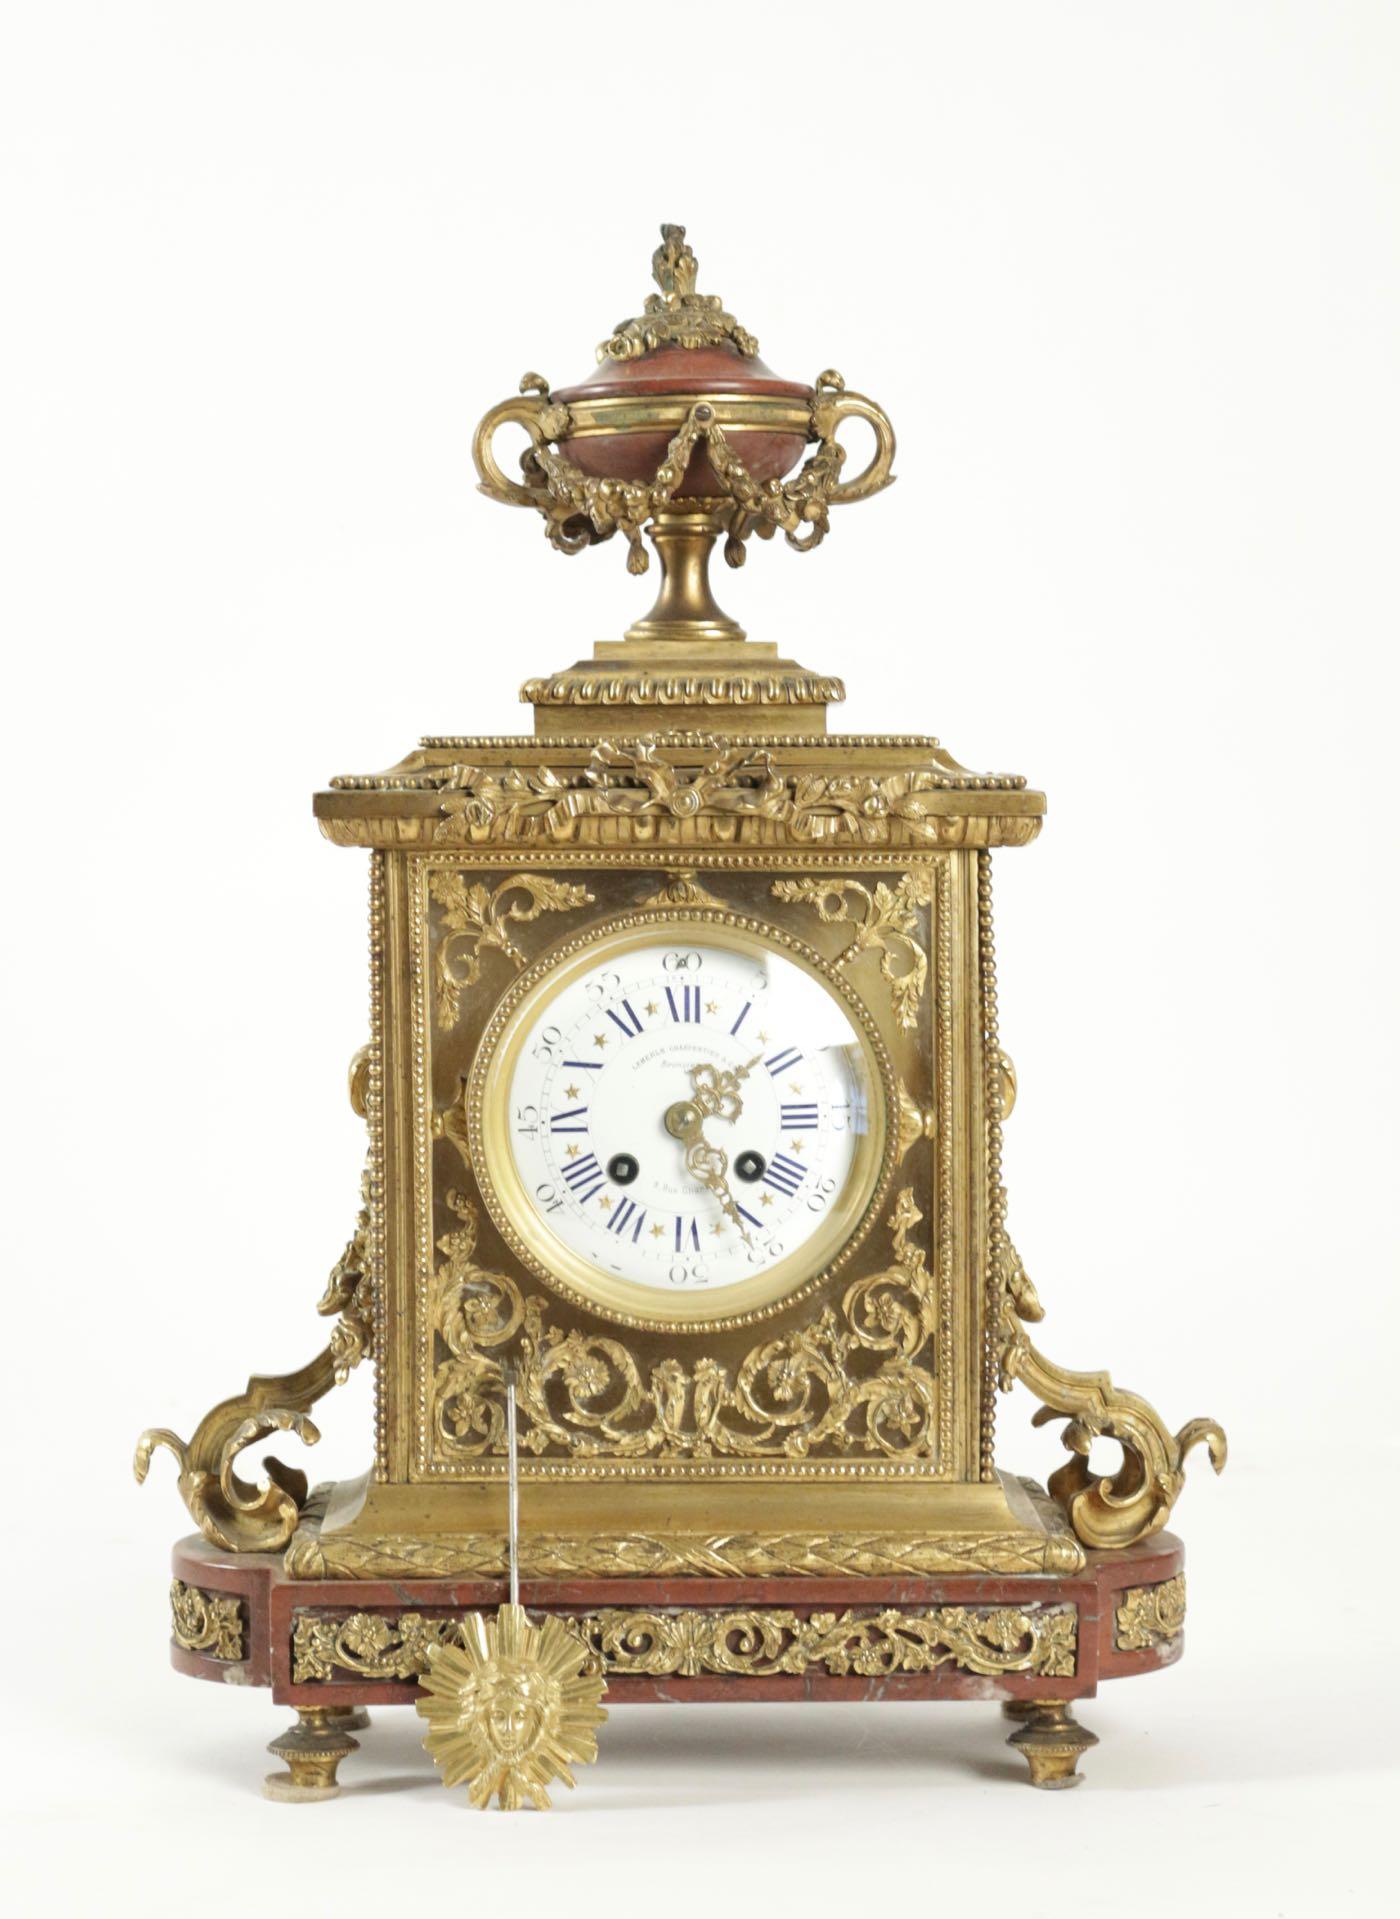 Clock set with 4 lights candelabras, 19th century, Griotte marble, gilt bronze and crystal.
Louis XVI style.